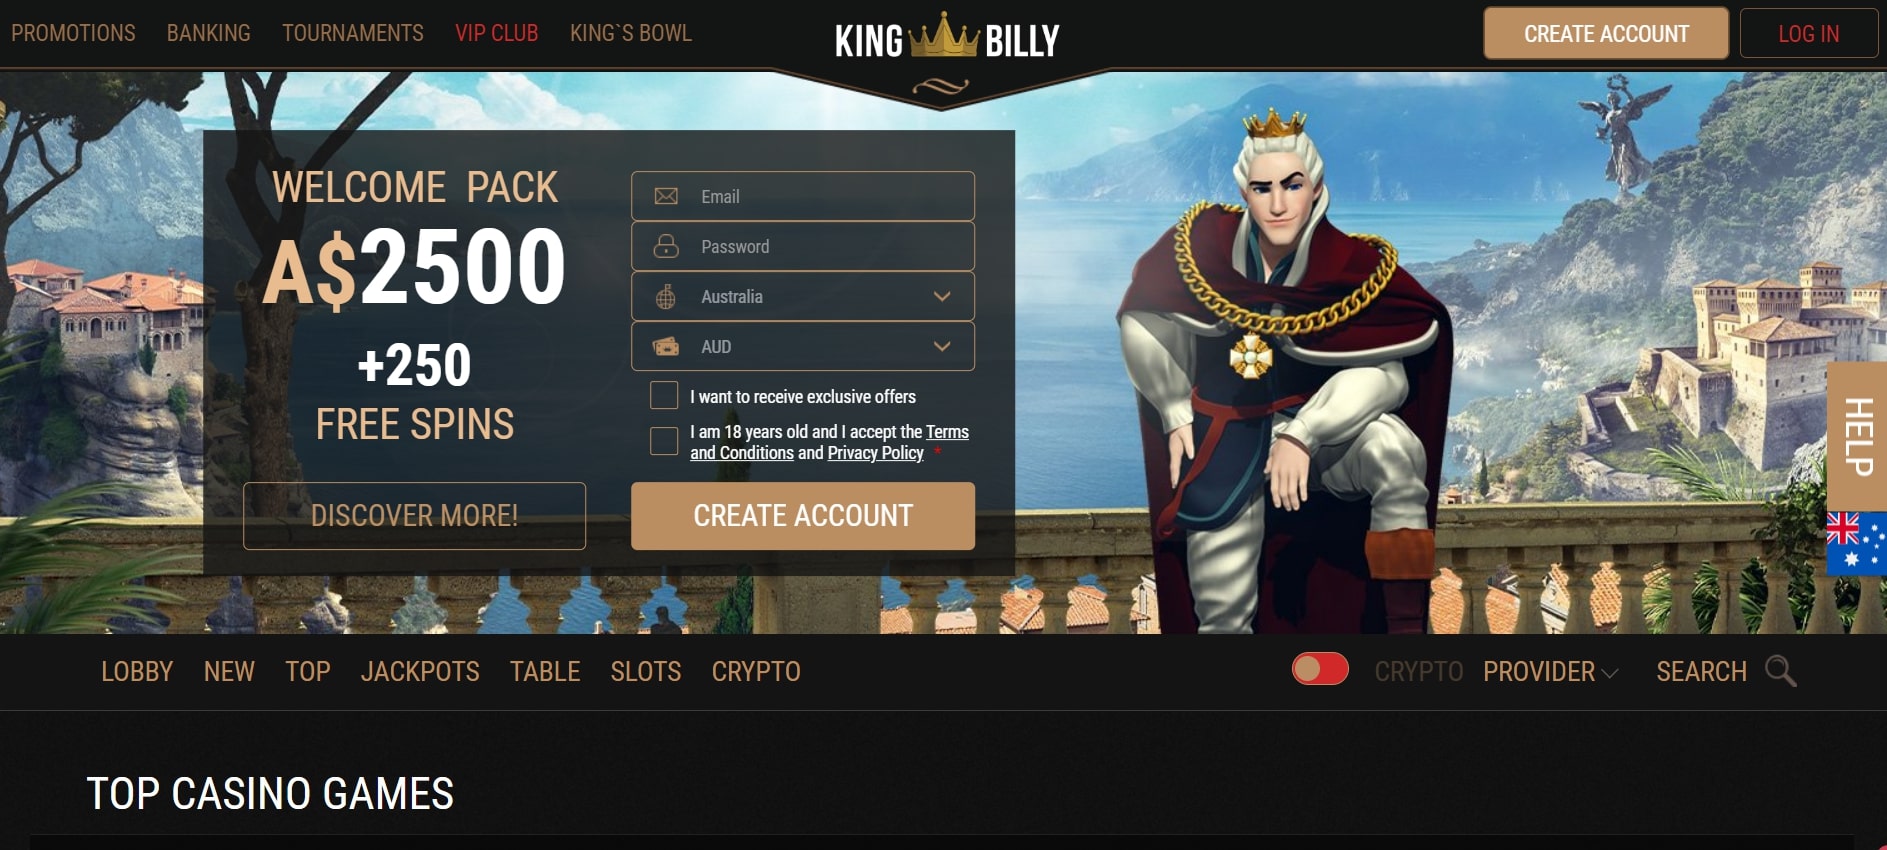 Play King Billy Casino Games For Real Money in Australia